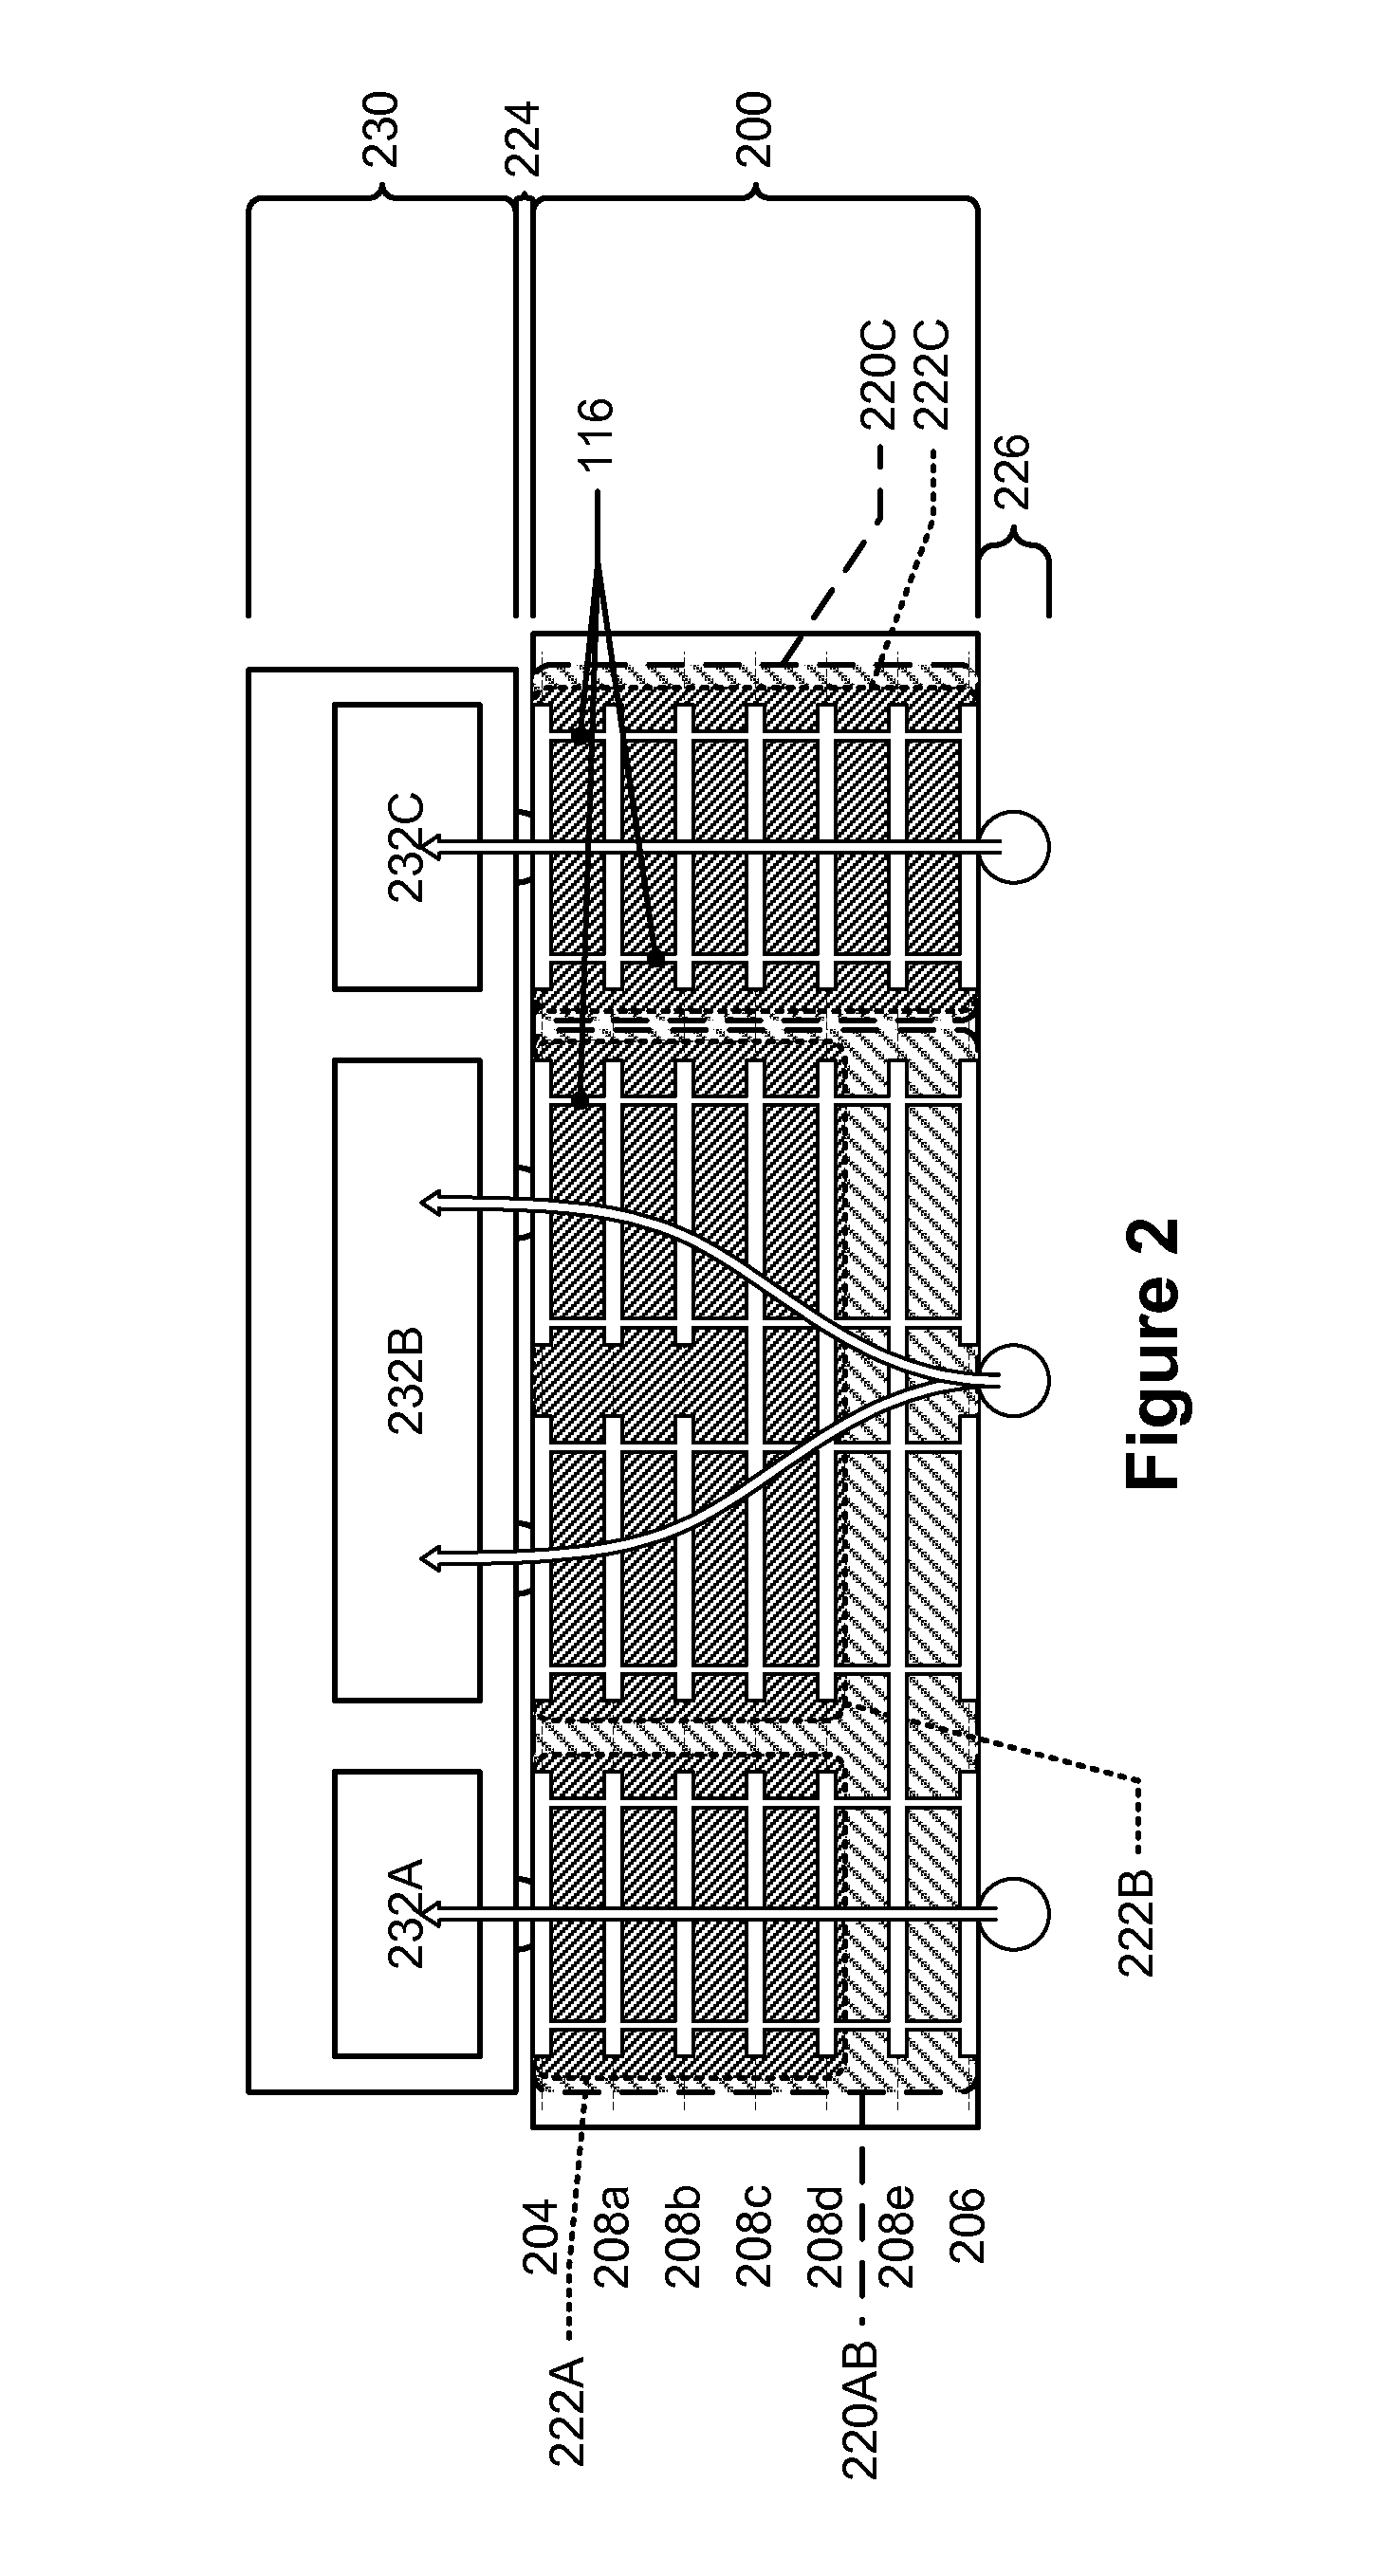 Package substrate with current flow shaping features